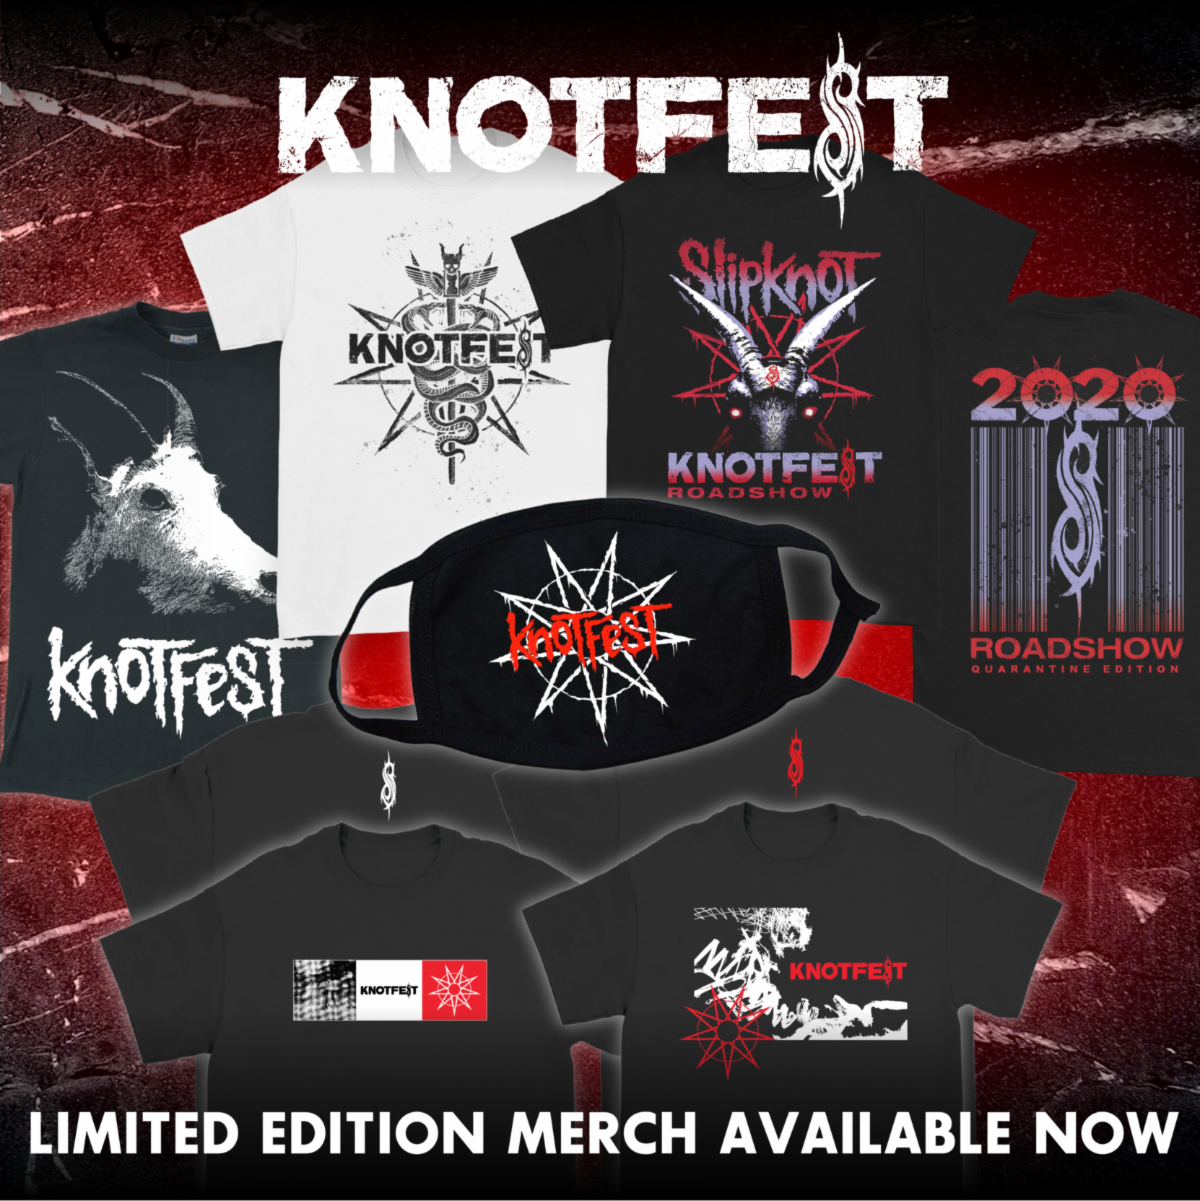 KNOTFEST.COM Launches New Global Content Destination With Special Knotfest Roadshow Streaming Event